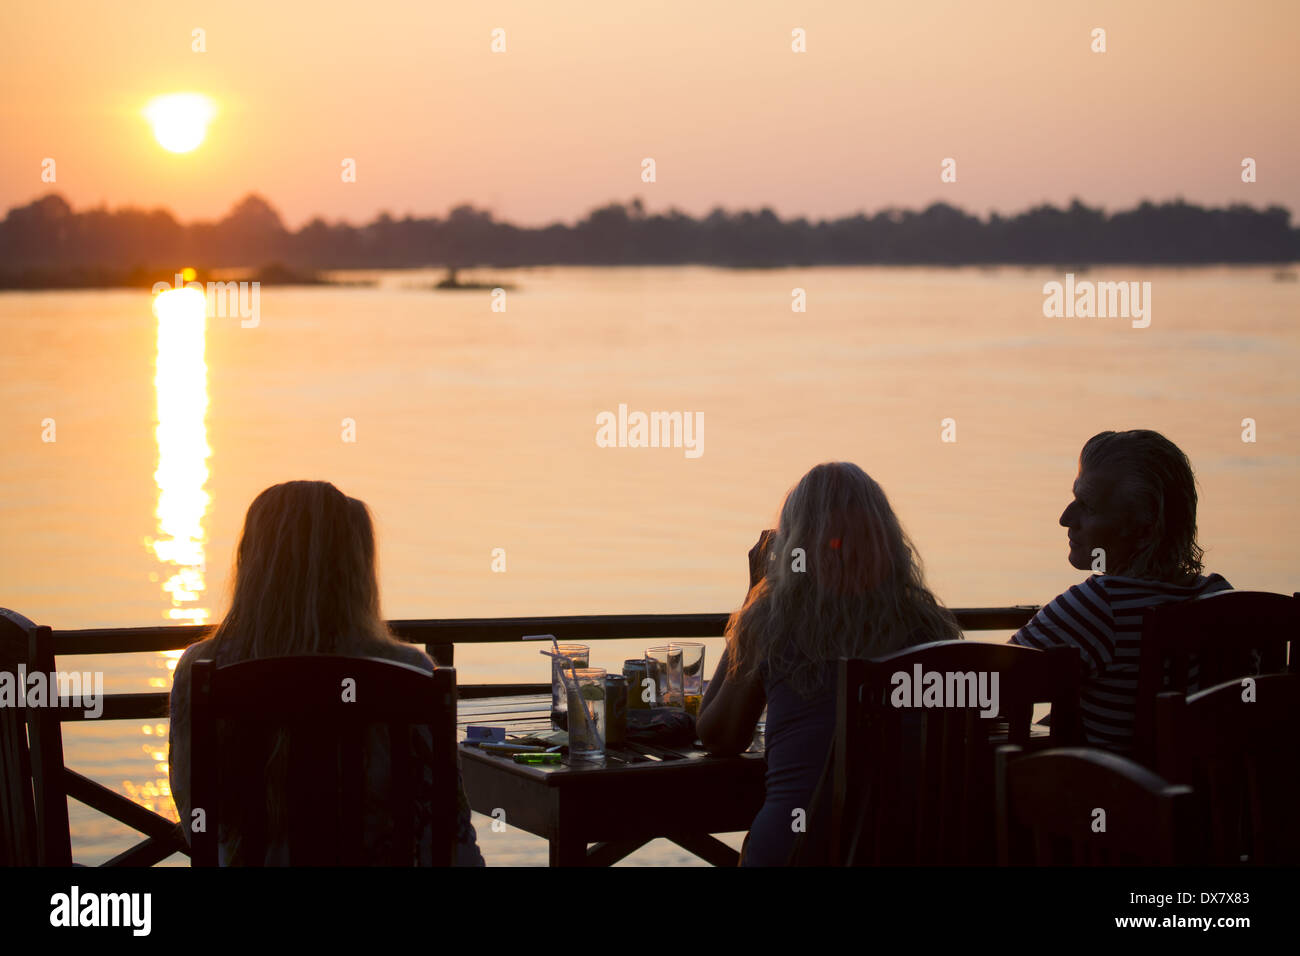 Don Det island in the Mekong River, there are 4000 Islands in Southern Laos Stock Photo